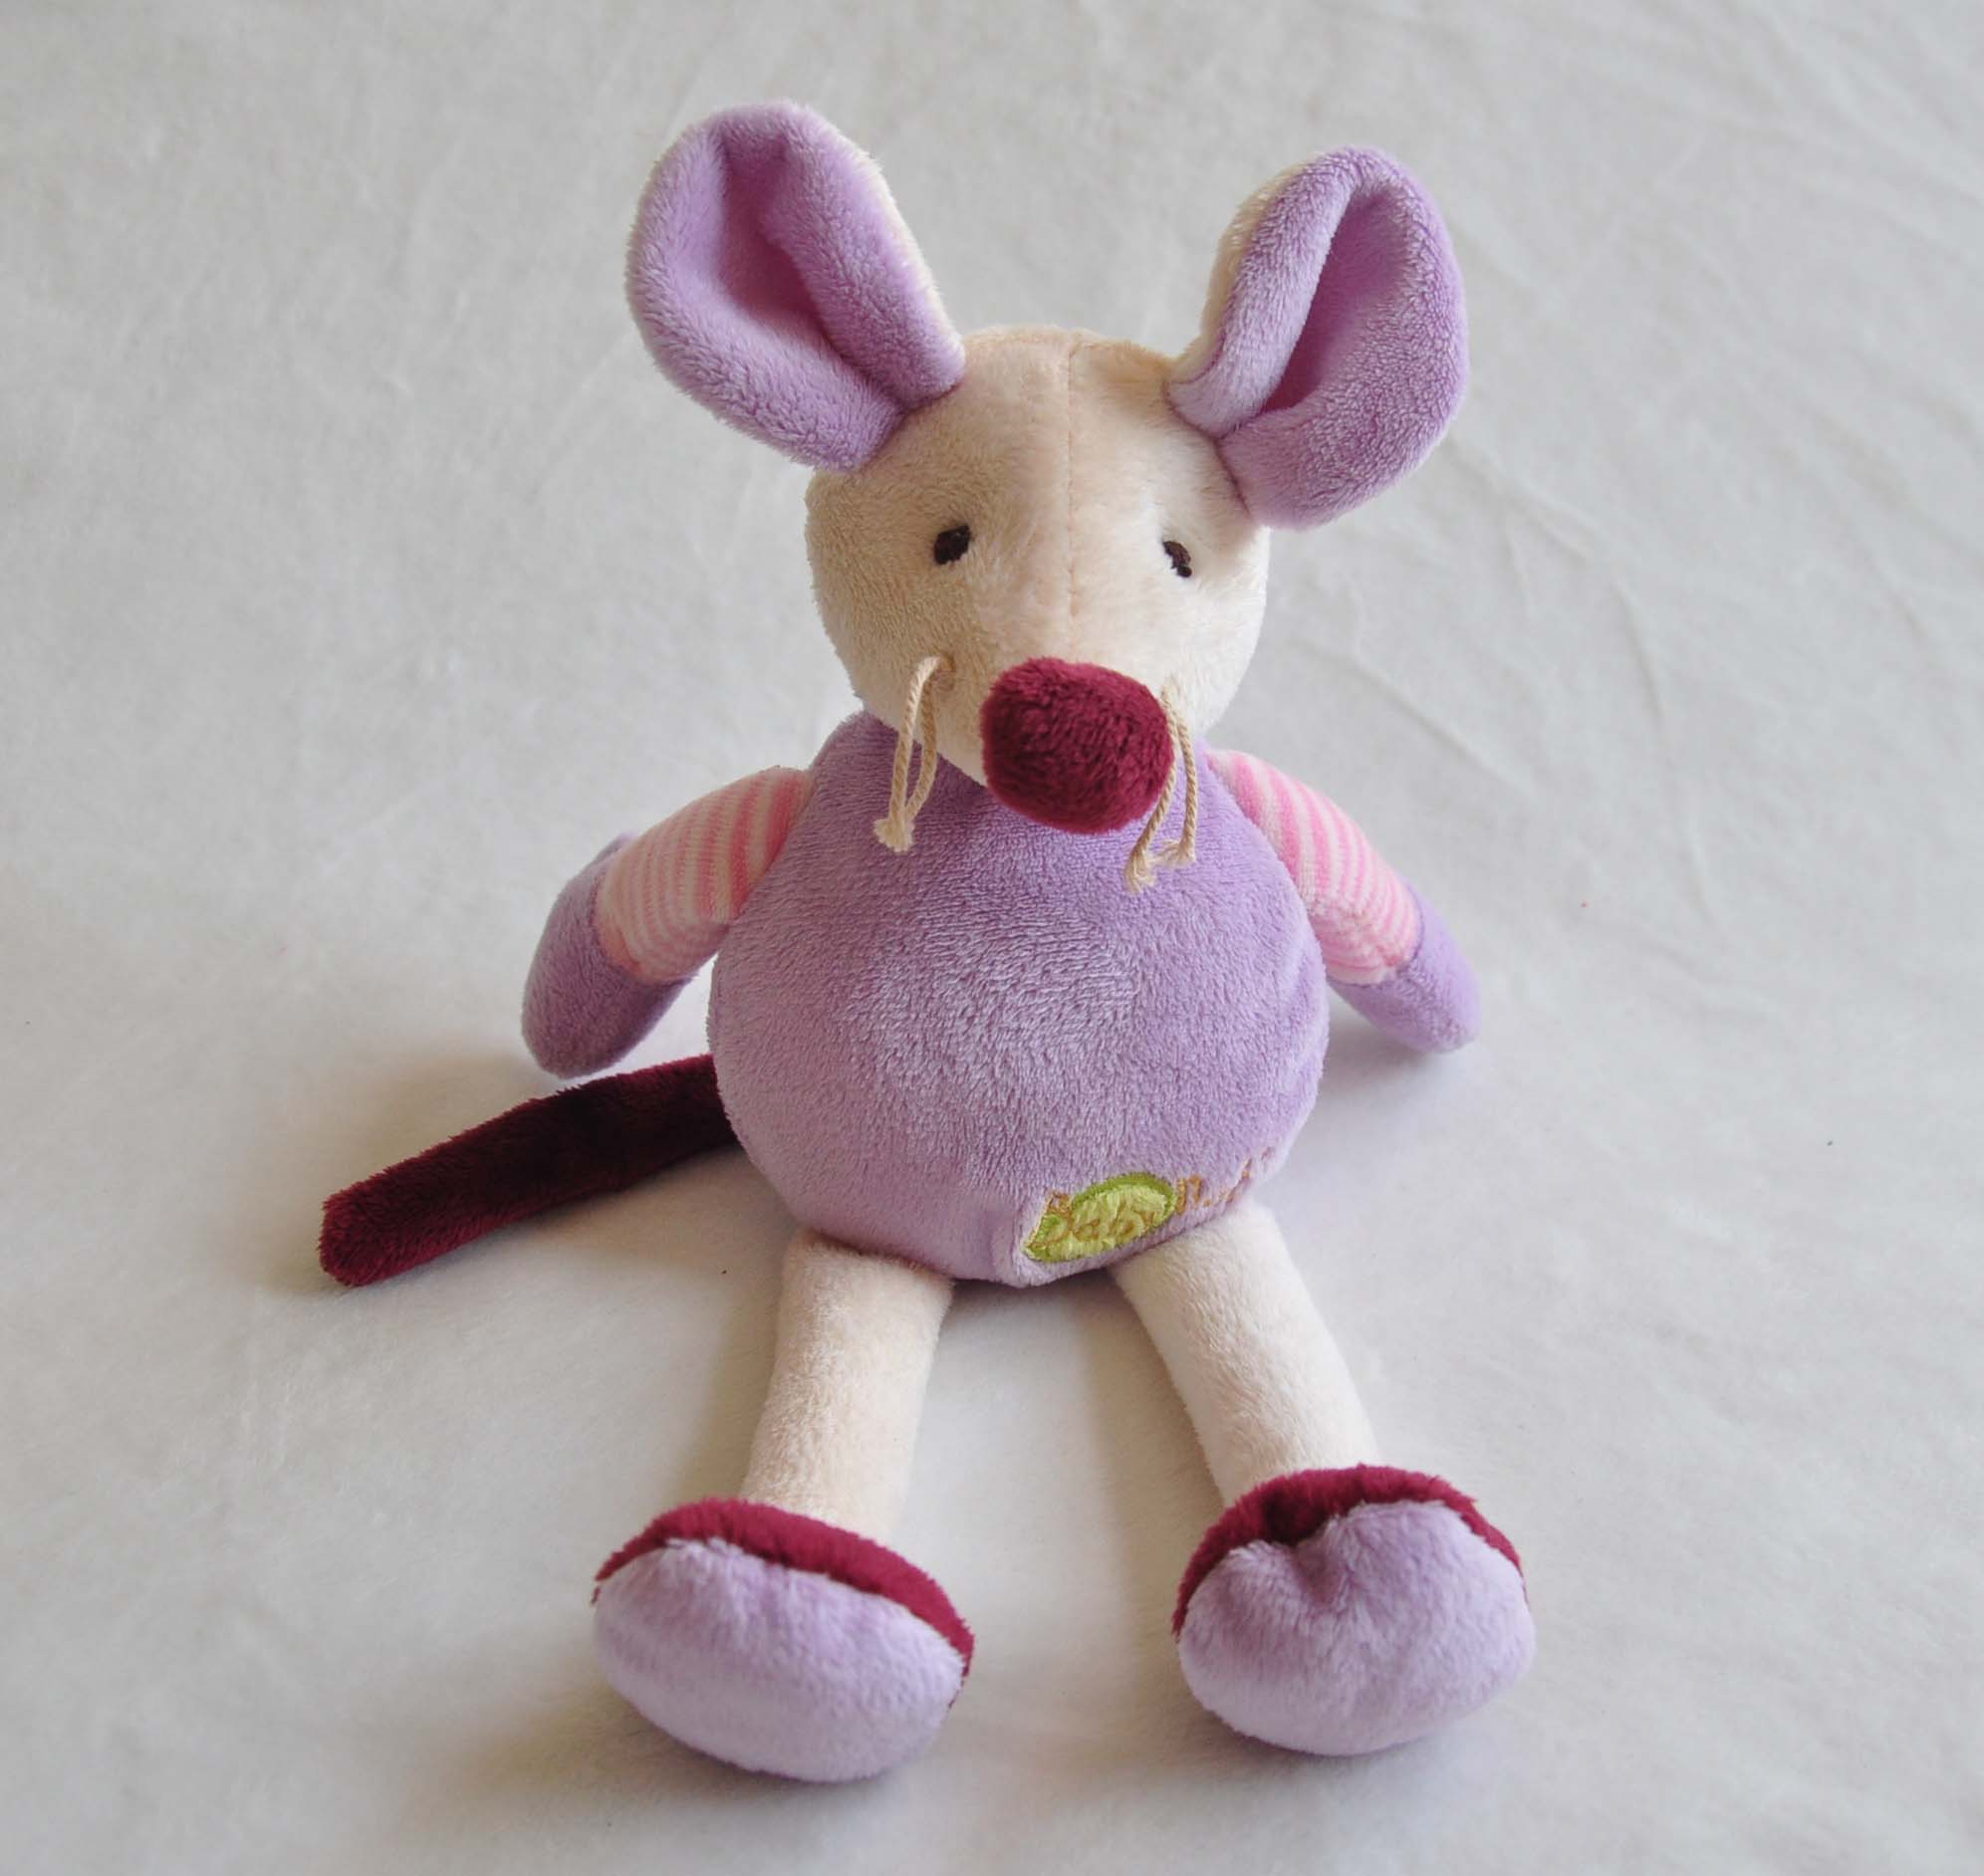 Chinese plush toy of purple mouse